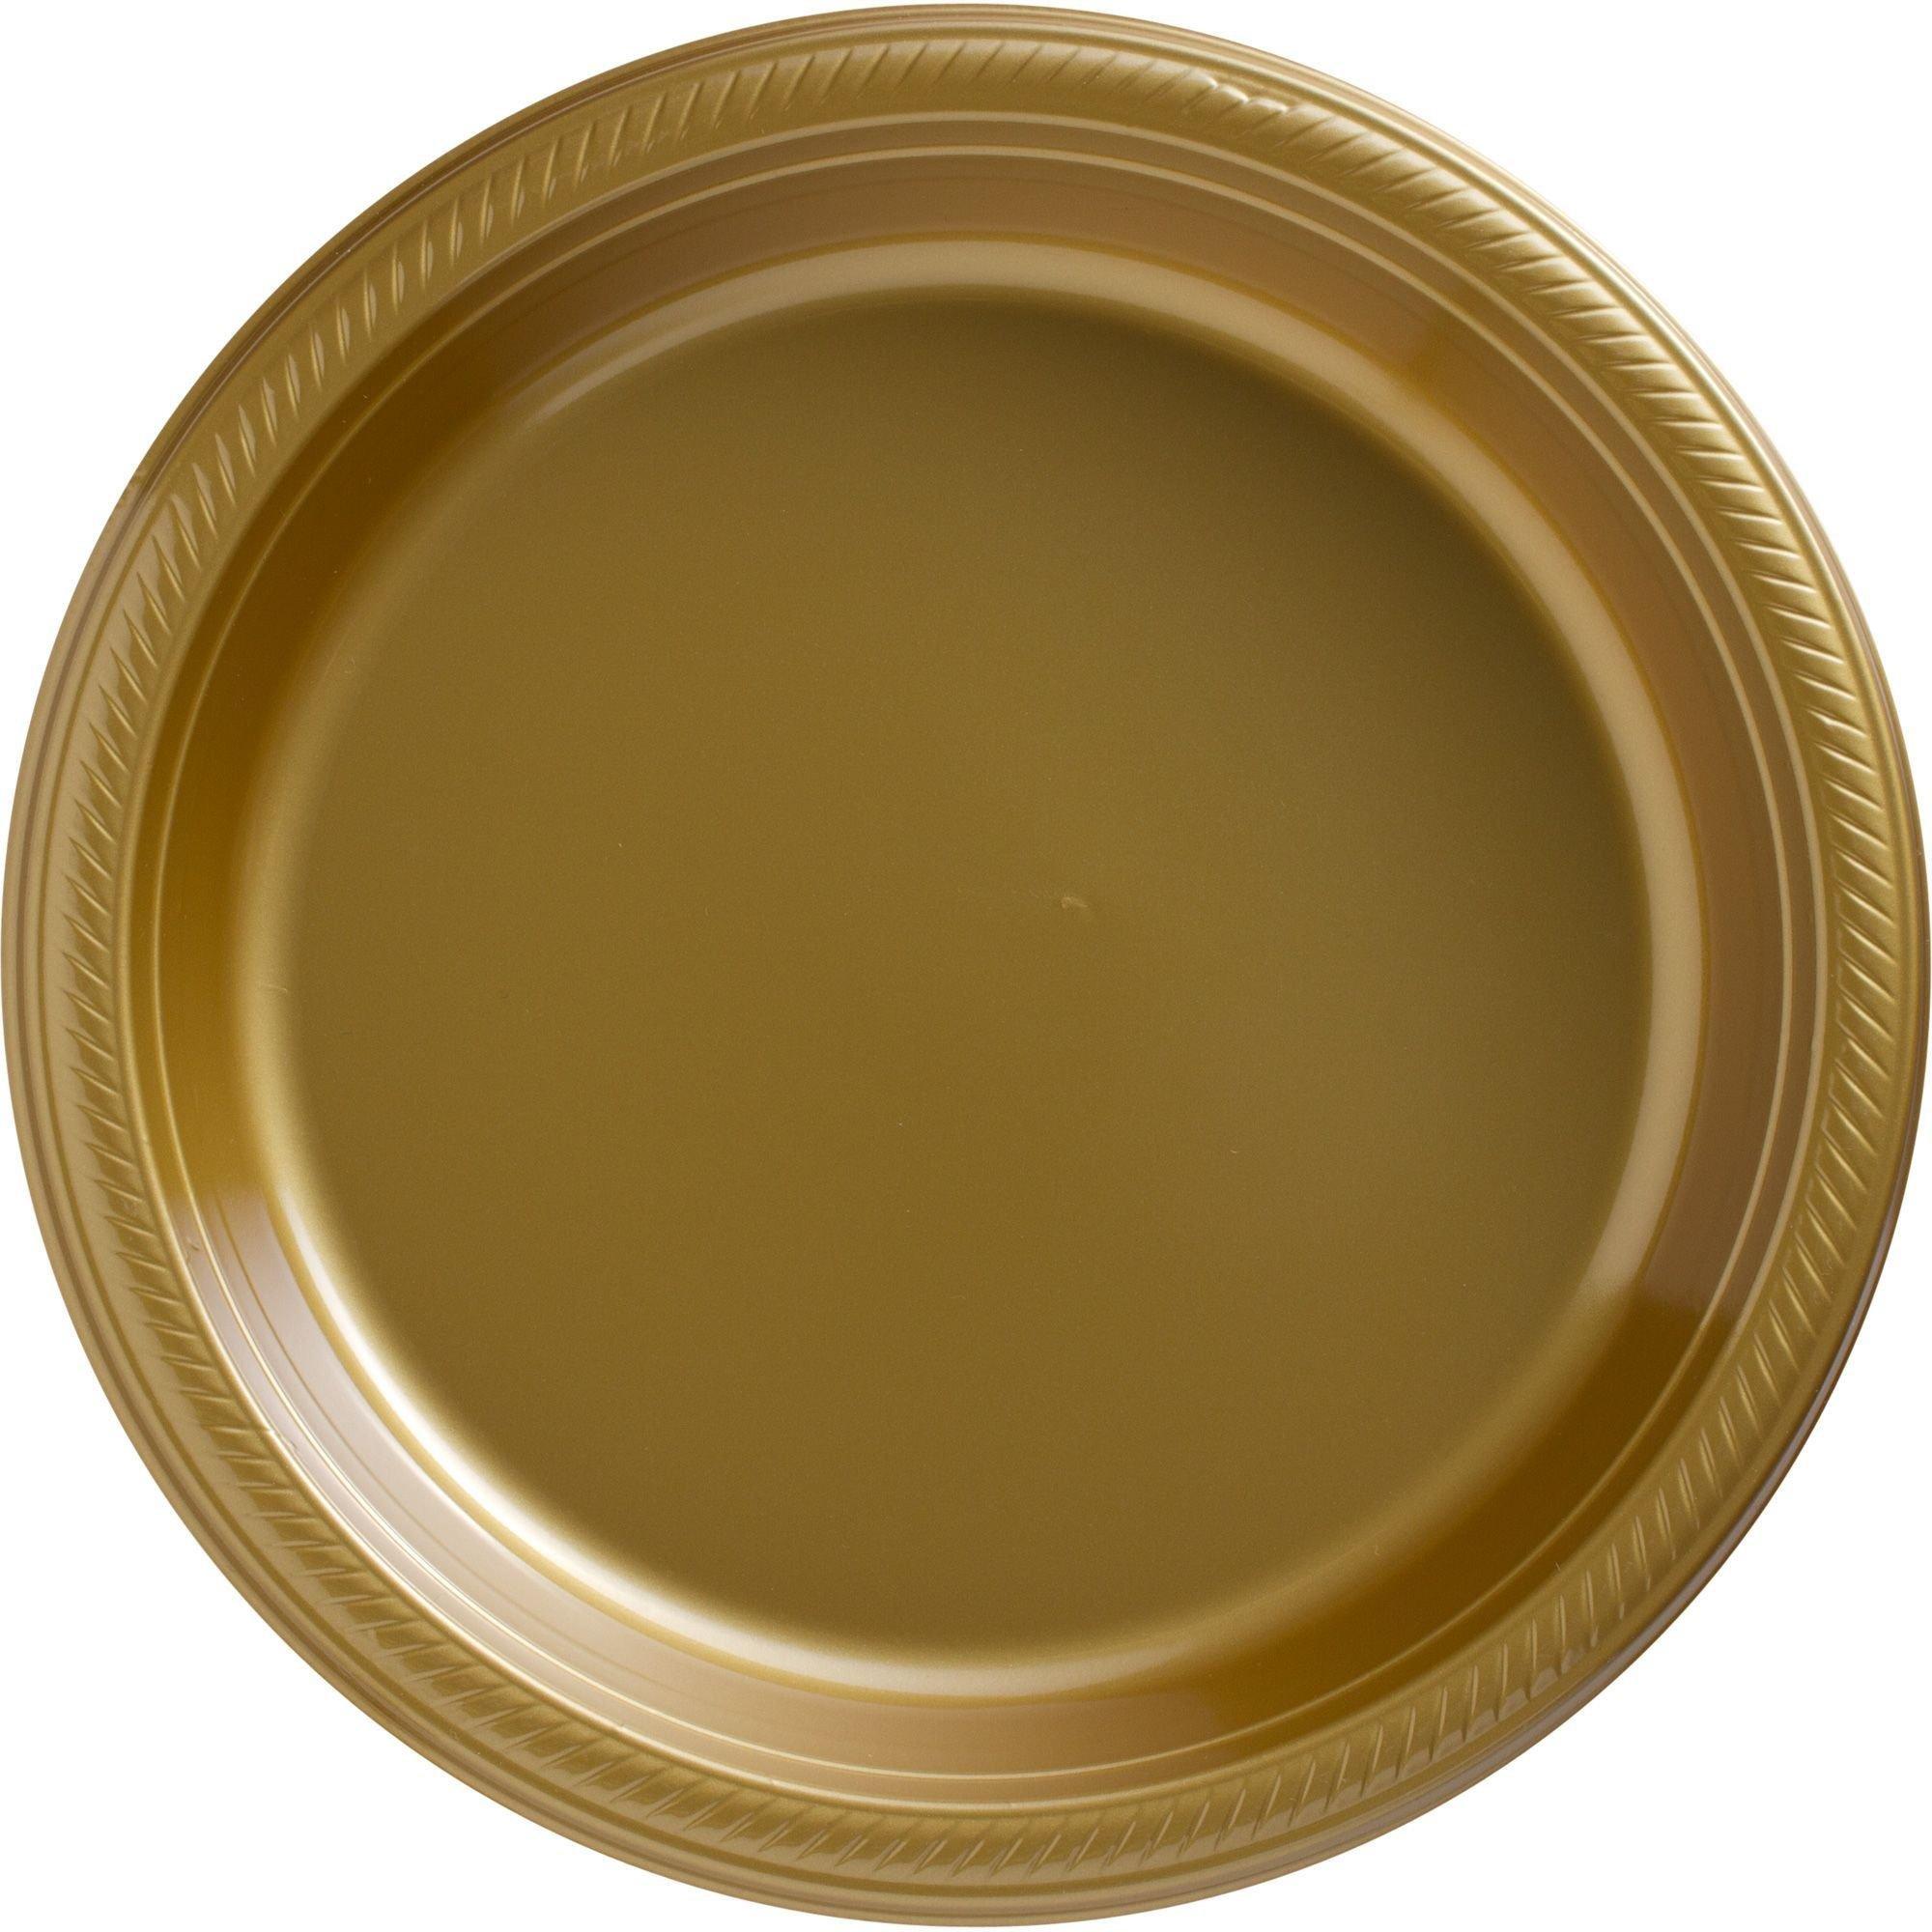 Gold & Plastic Tableware Kit for 50 Guests